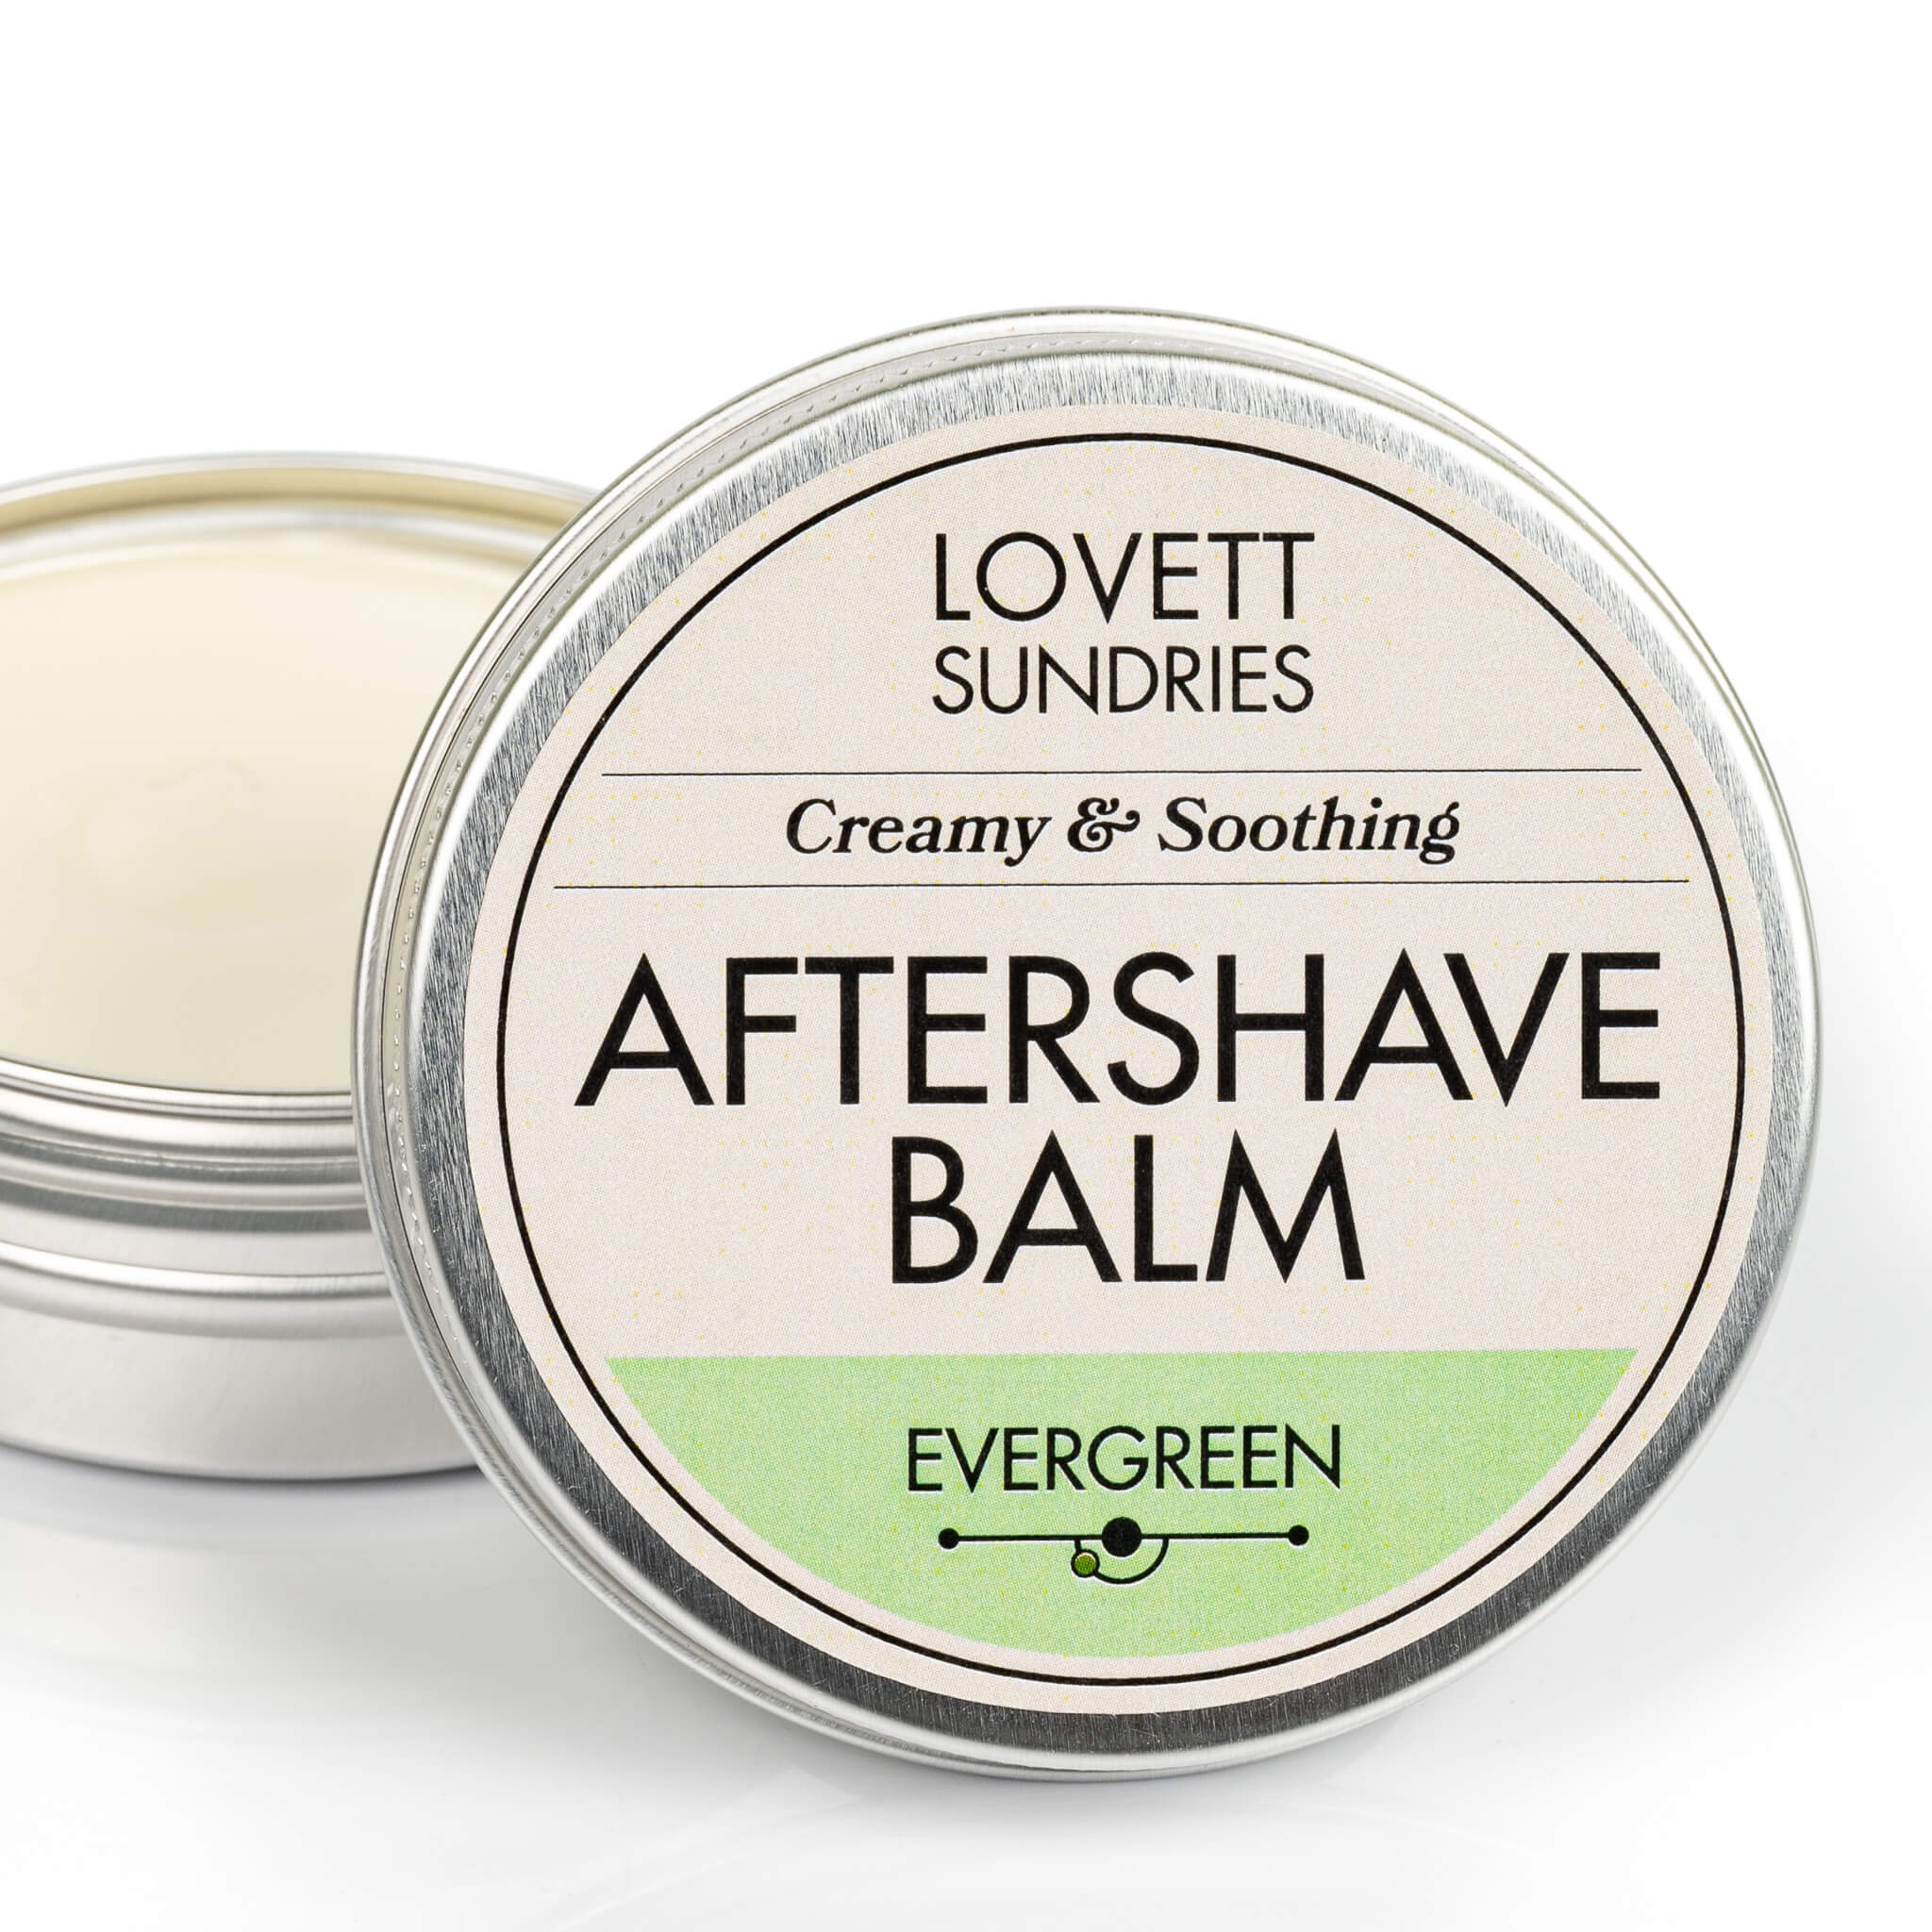 All natural evergreen scented aftershave balm